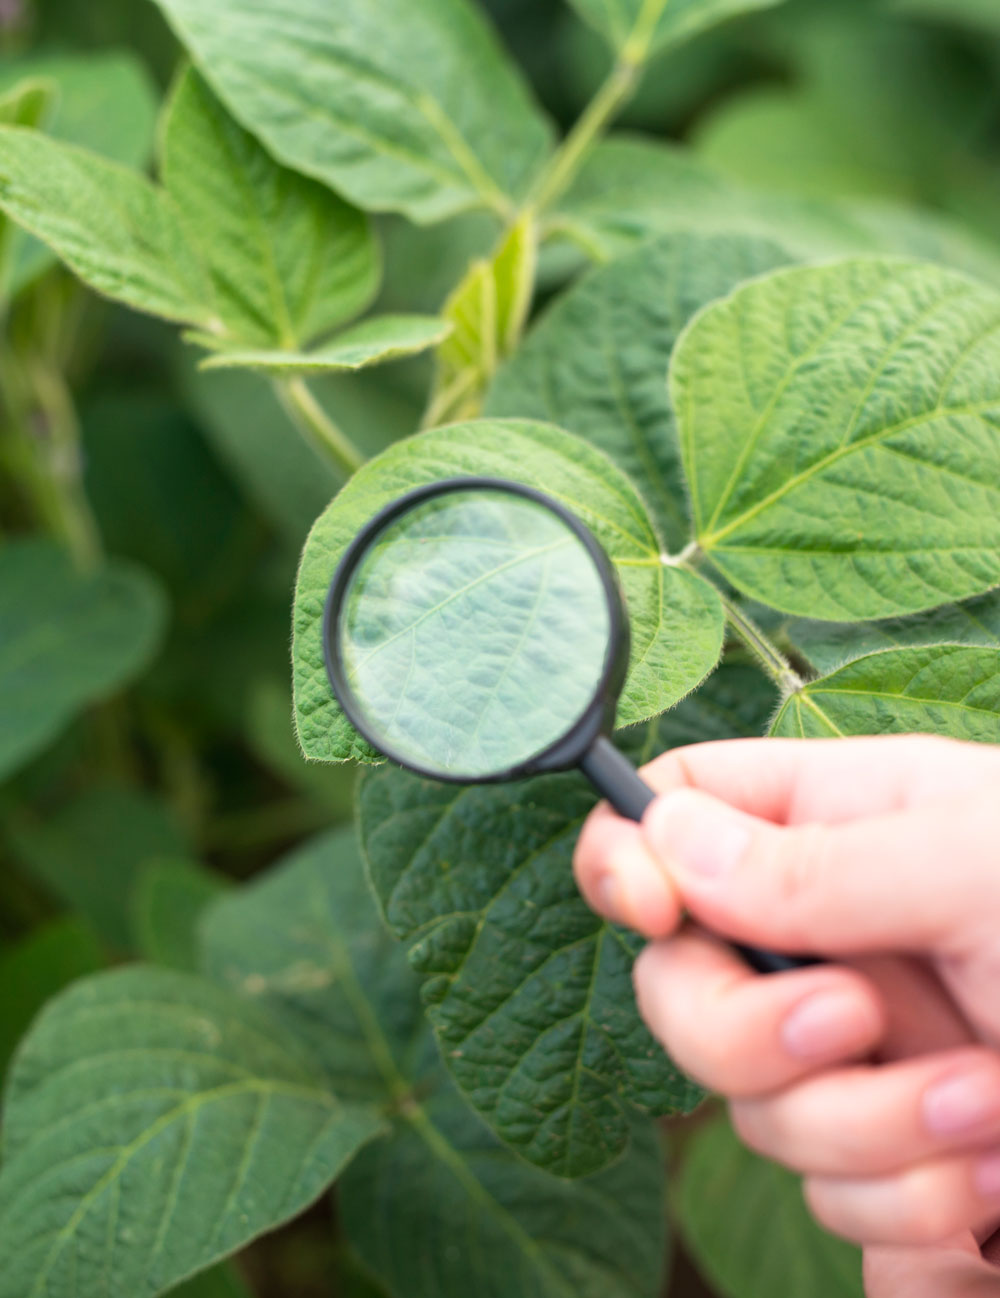 close-up-view-hands-holding-magnifying-glass-checking-soybean-leaf-web